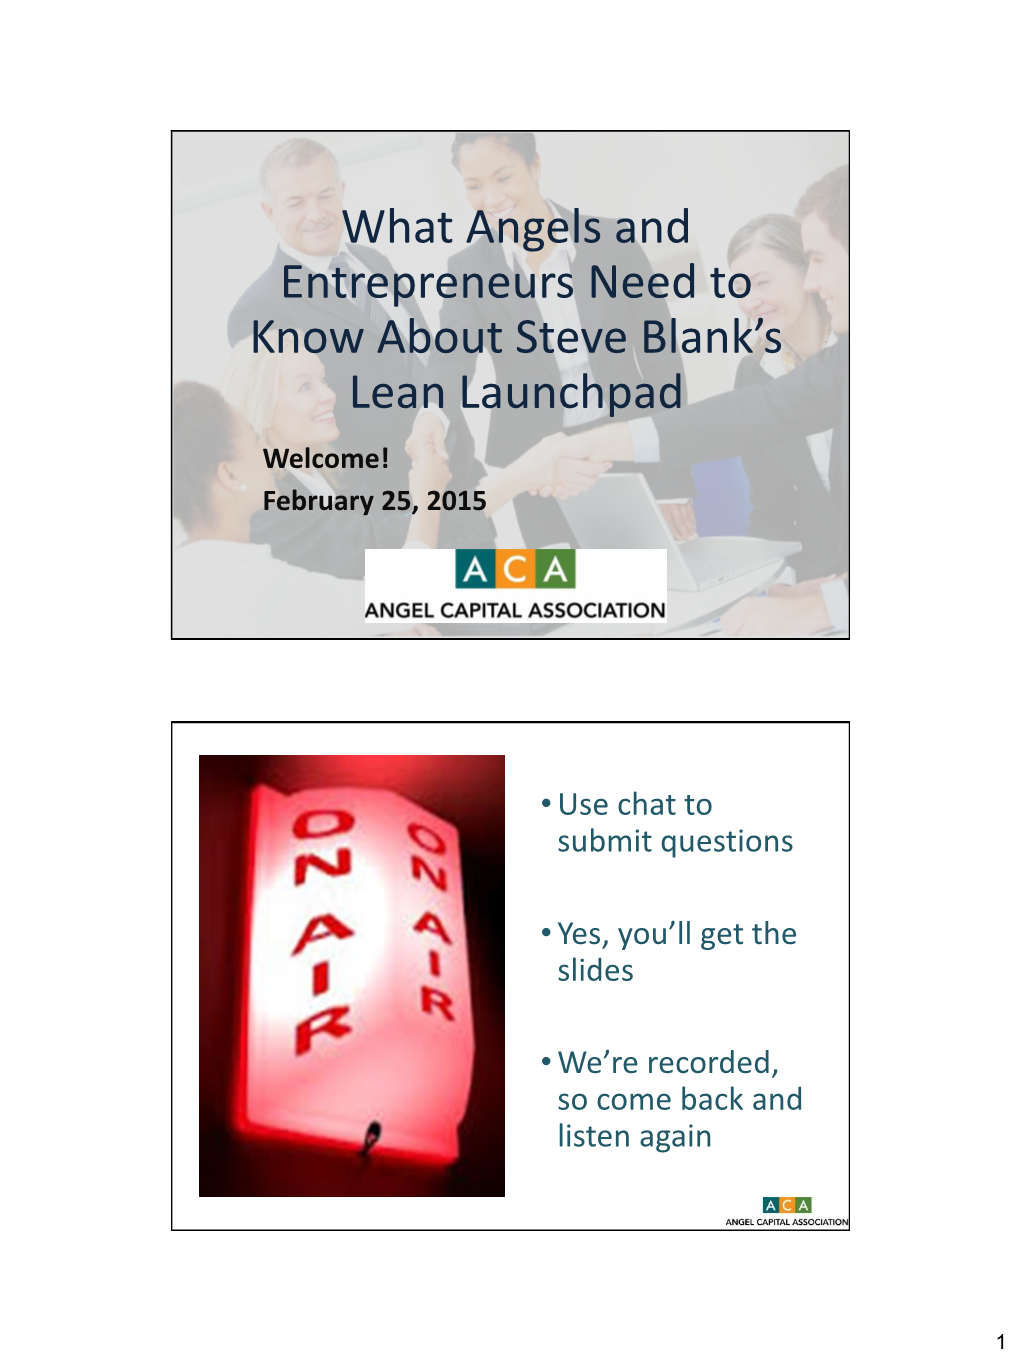 What Angels and Entrepreneurs Need to Know About Steve Blank's Lean